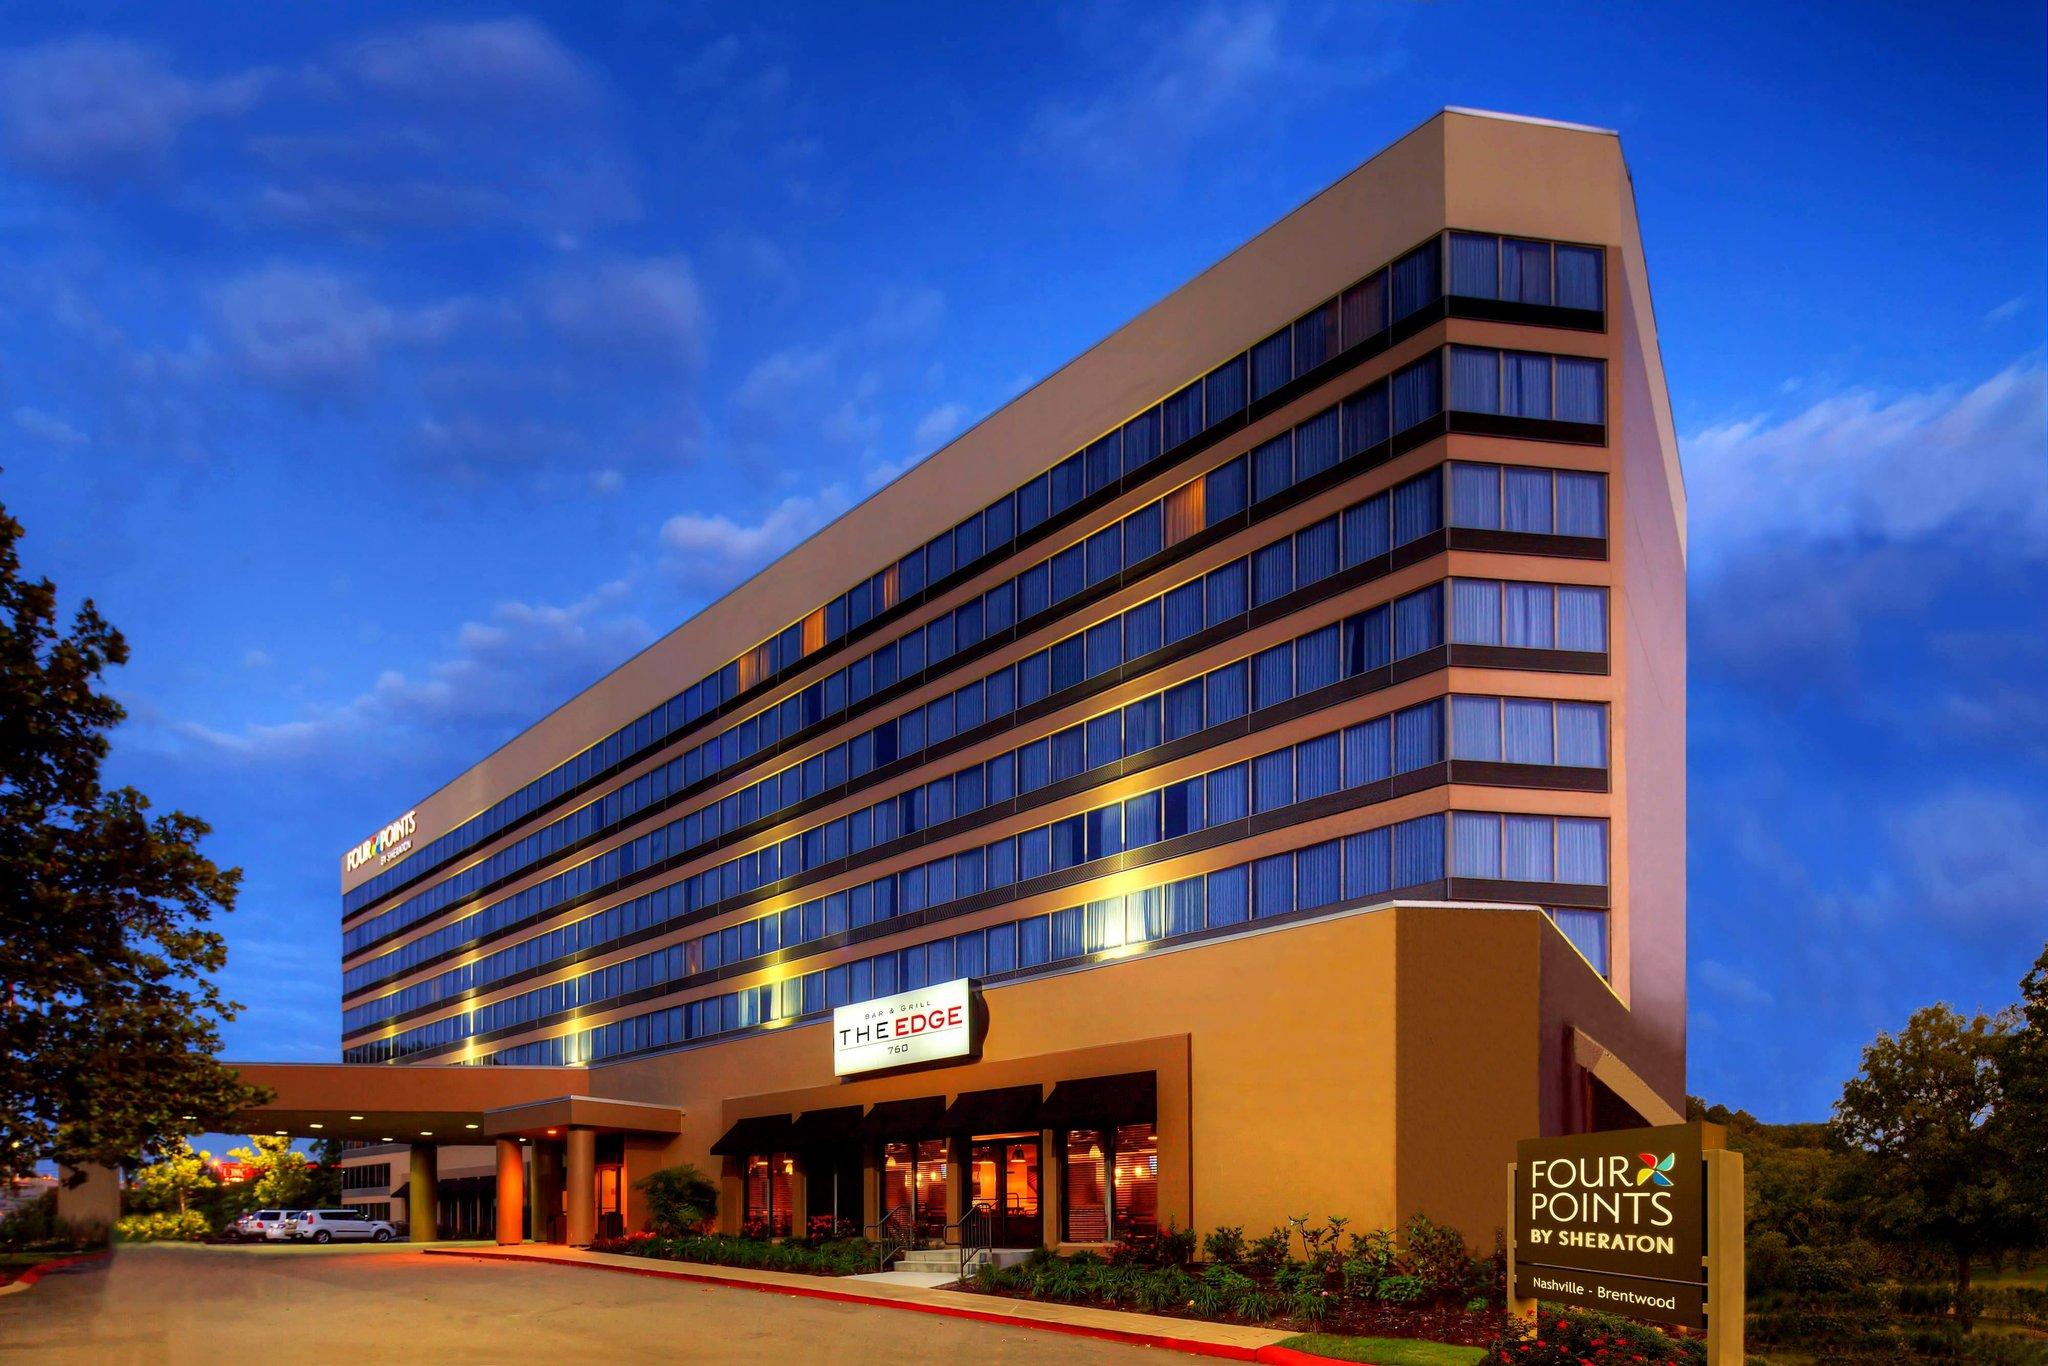 Four Points by Sheraton Nashville - Brentwood in Brentwood, TN